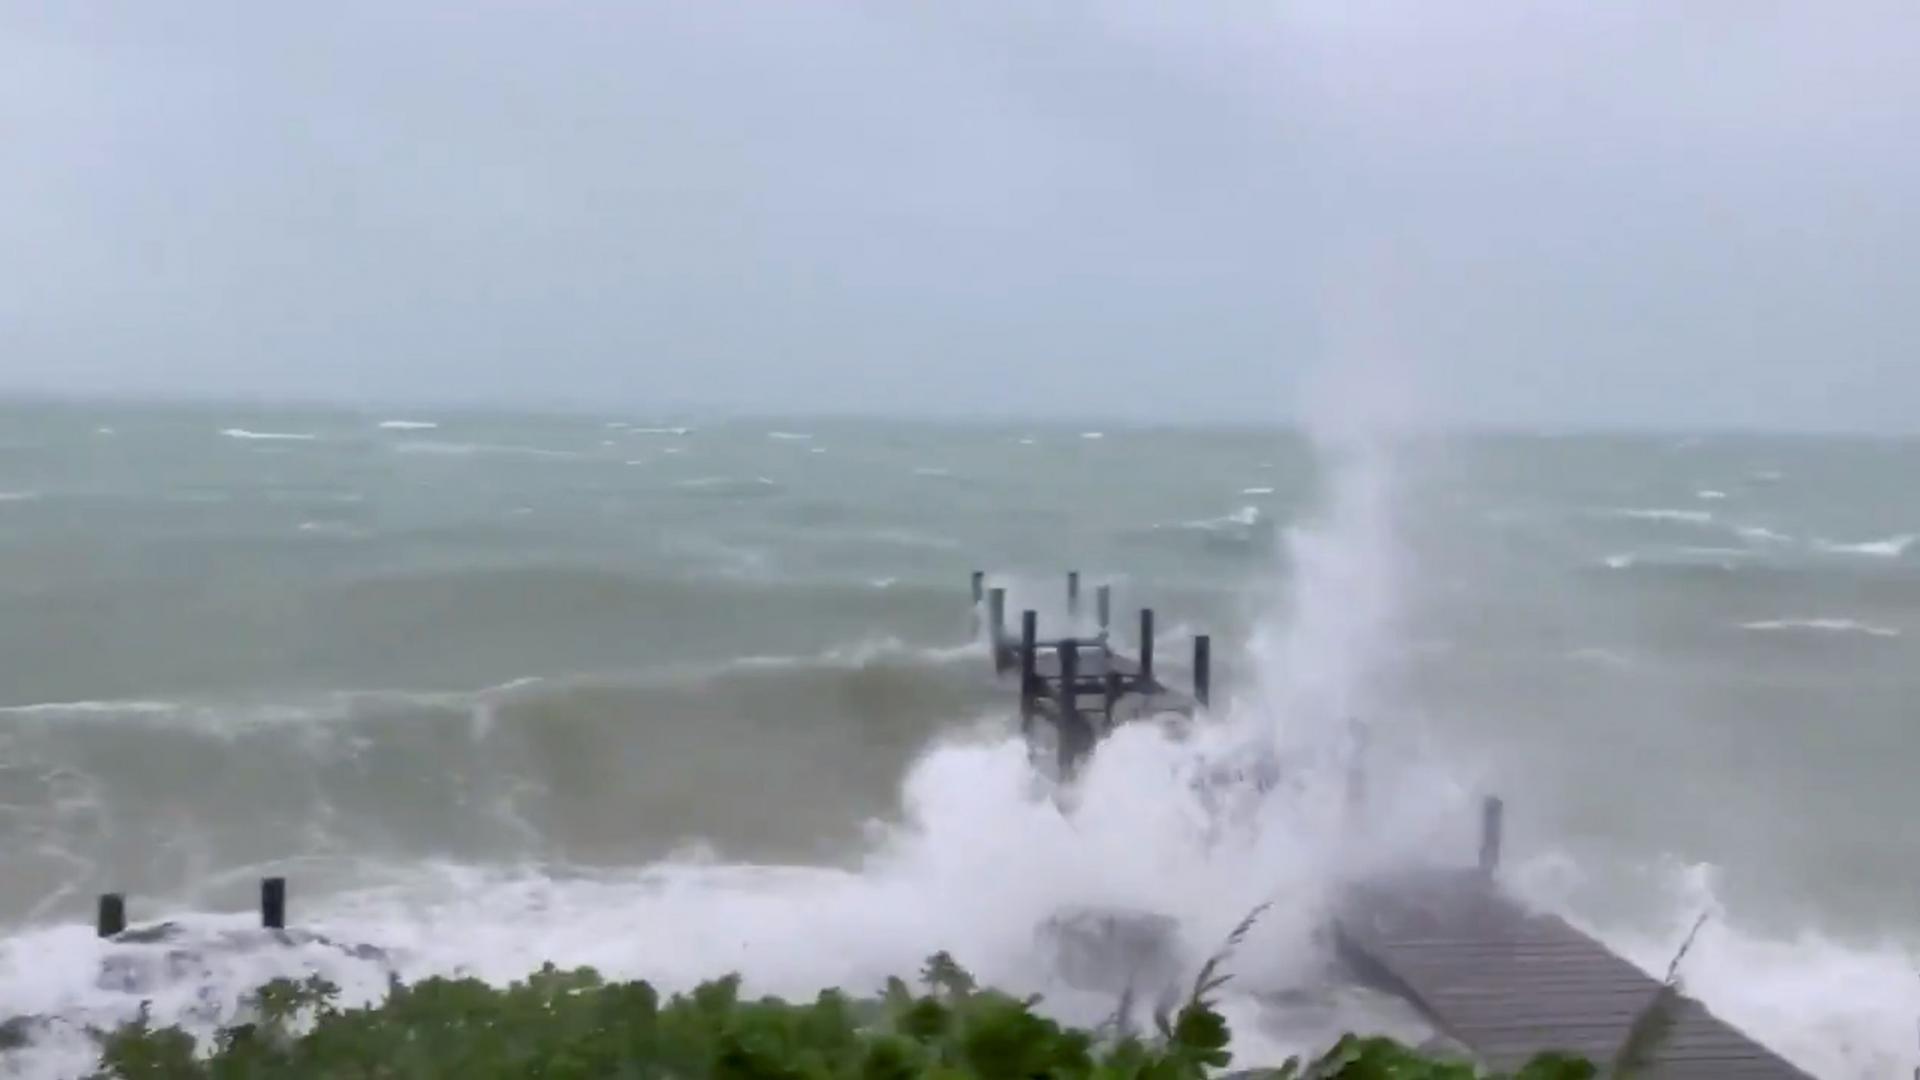 Waves are shown crashing into a dock jutting out into the ocean.